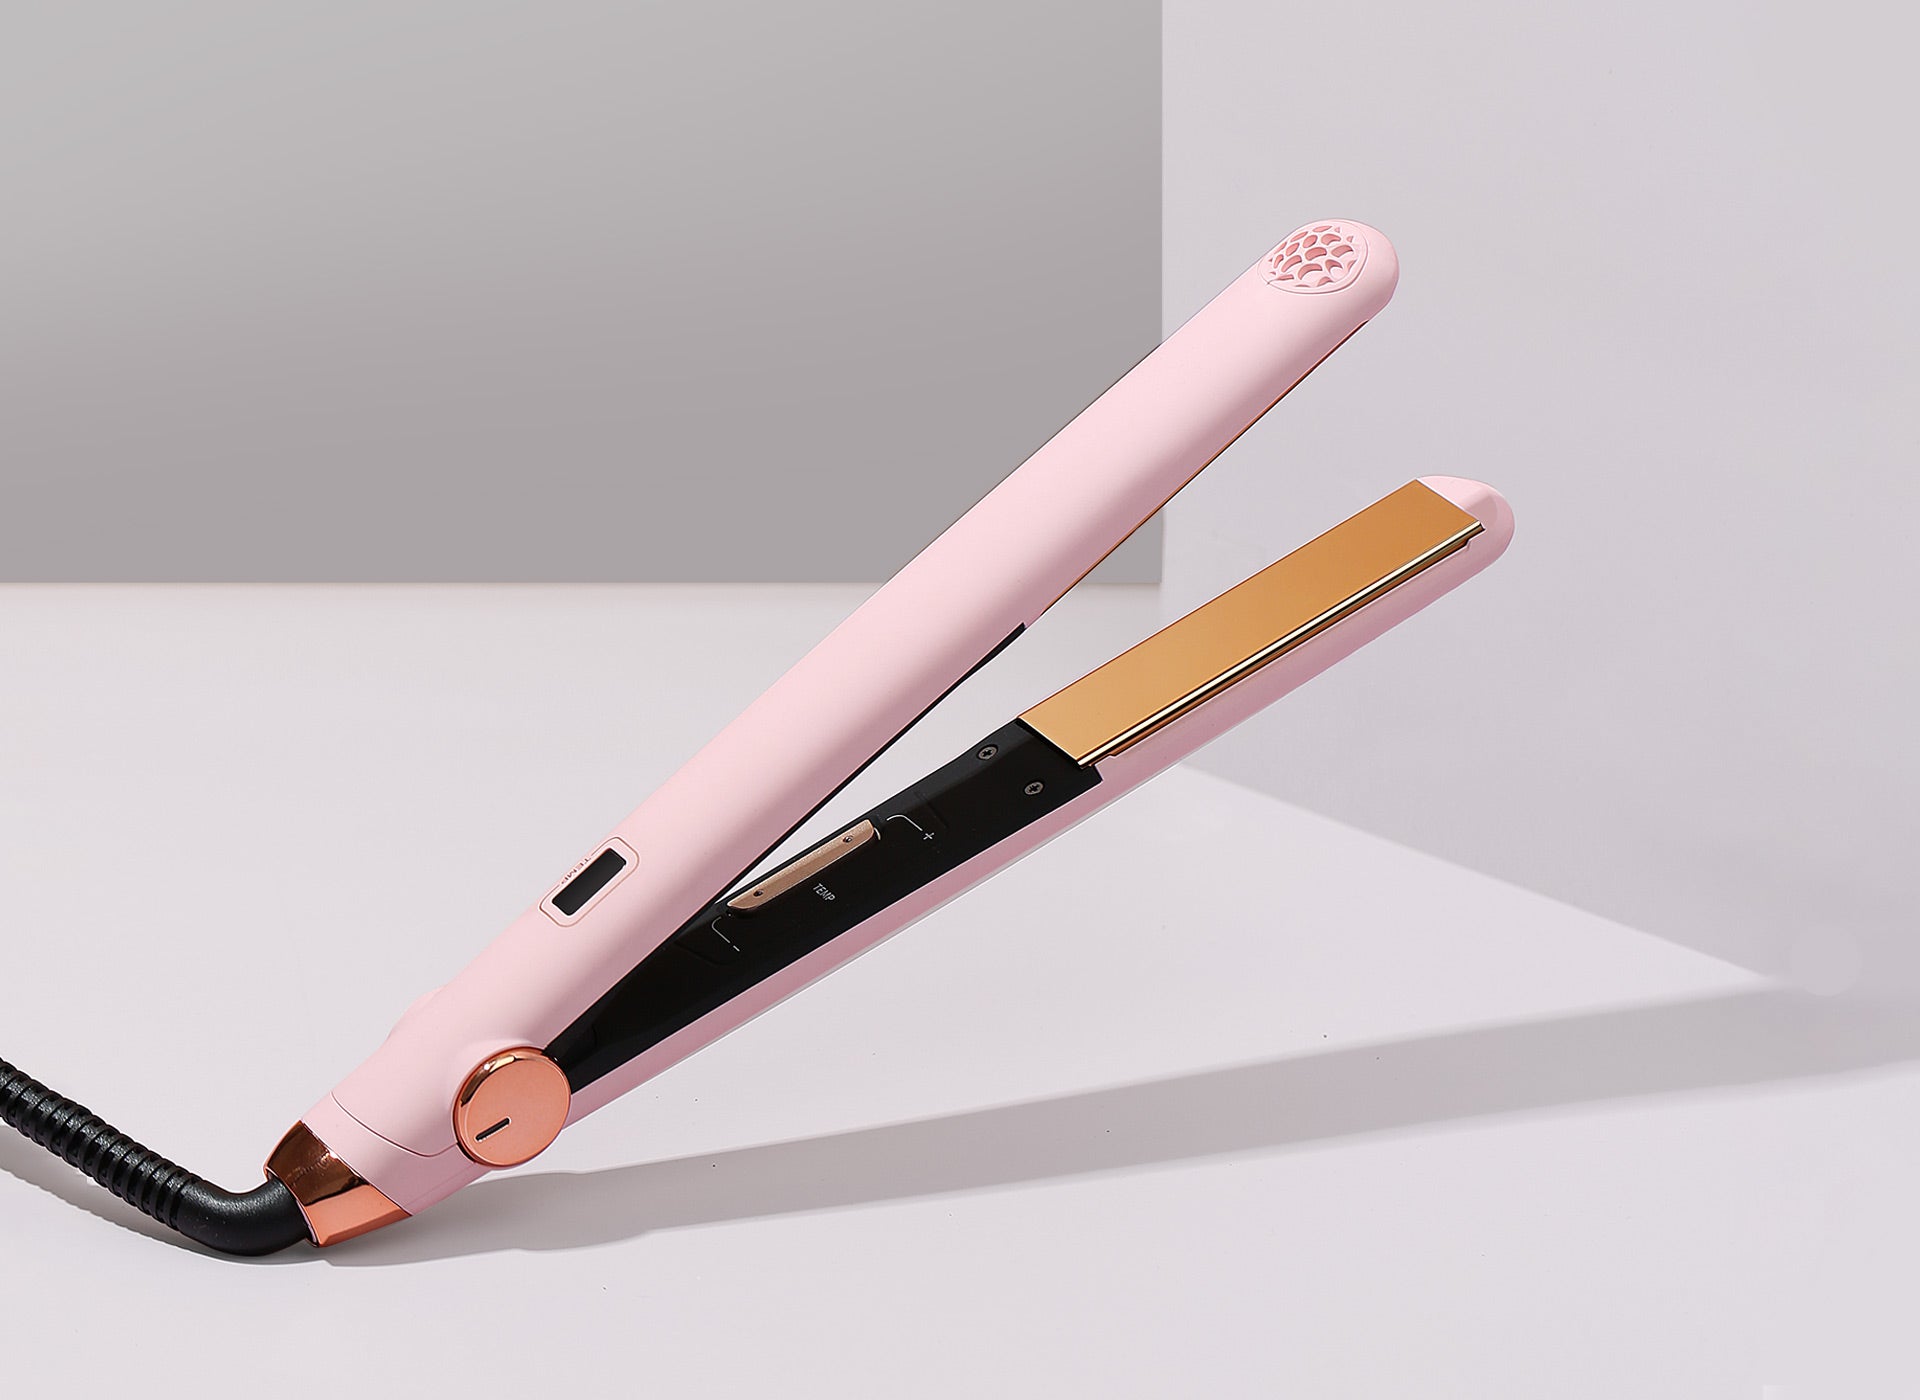 Elegant TYMO SWAY hair straightener with gold-plated plates, designed for creating sleek hairstyles with ease.